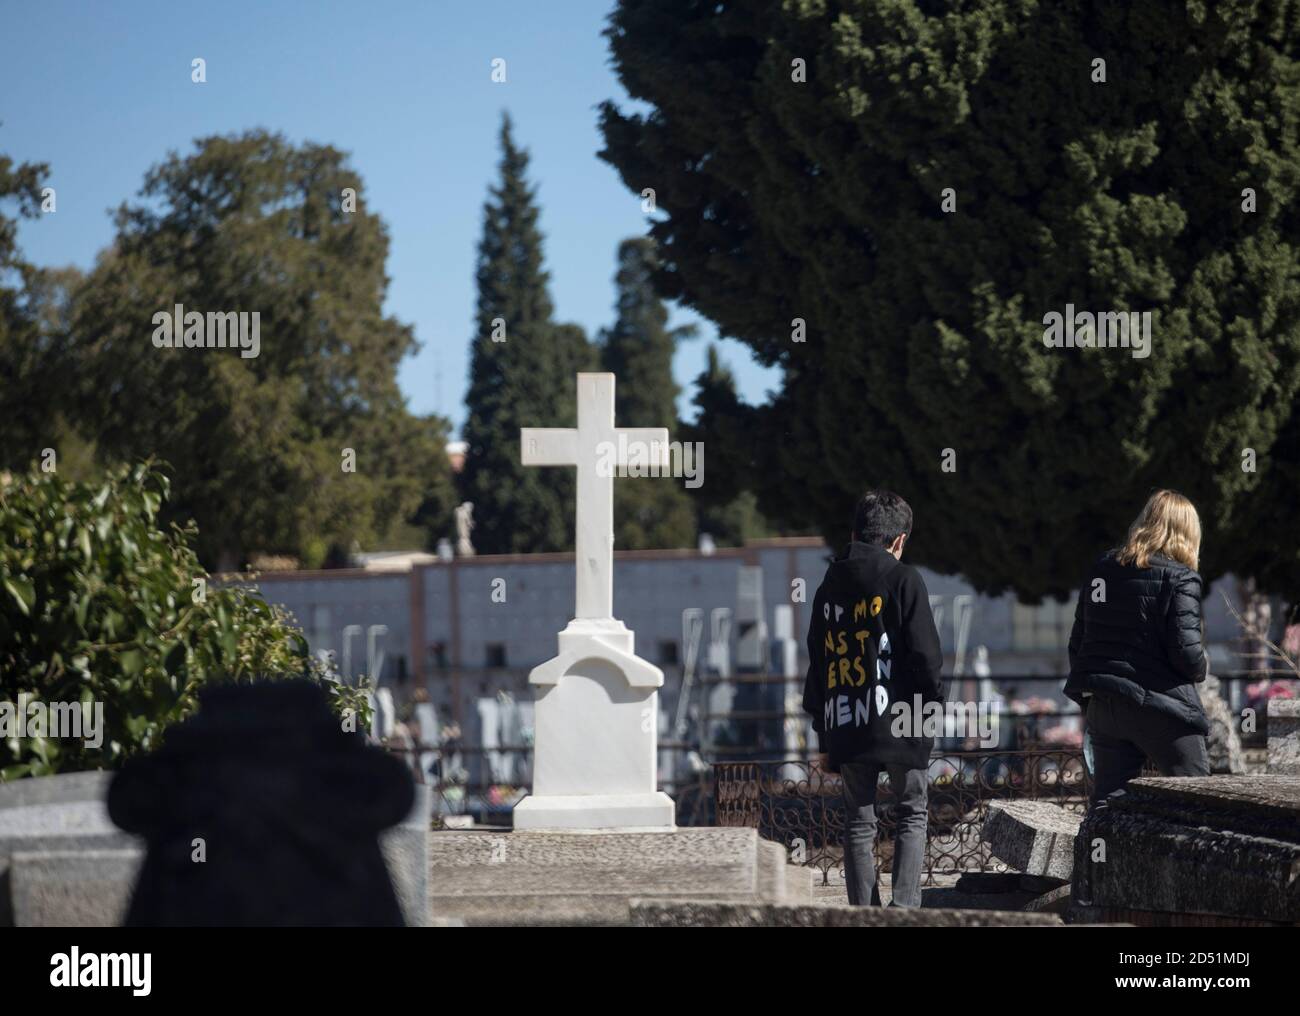 Madrid, Spain. 12th Oct, 2020. Mourners stand in the Almudena cemetery on the Spanish National Day. Spain is currently struggling with a particularly violent second wave of corona and has the highest infection rates in Western Europe. Credit: Javier Carbajal/dpa/Alamy Live News Stock Photo